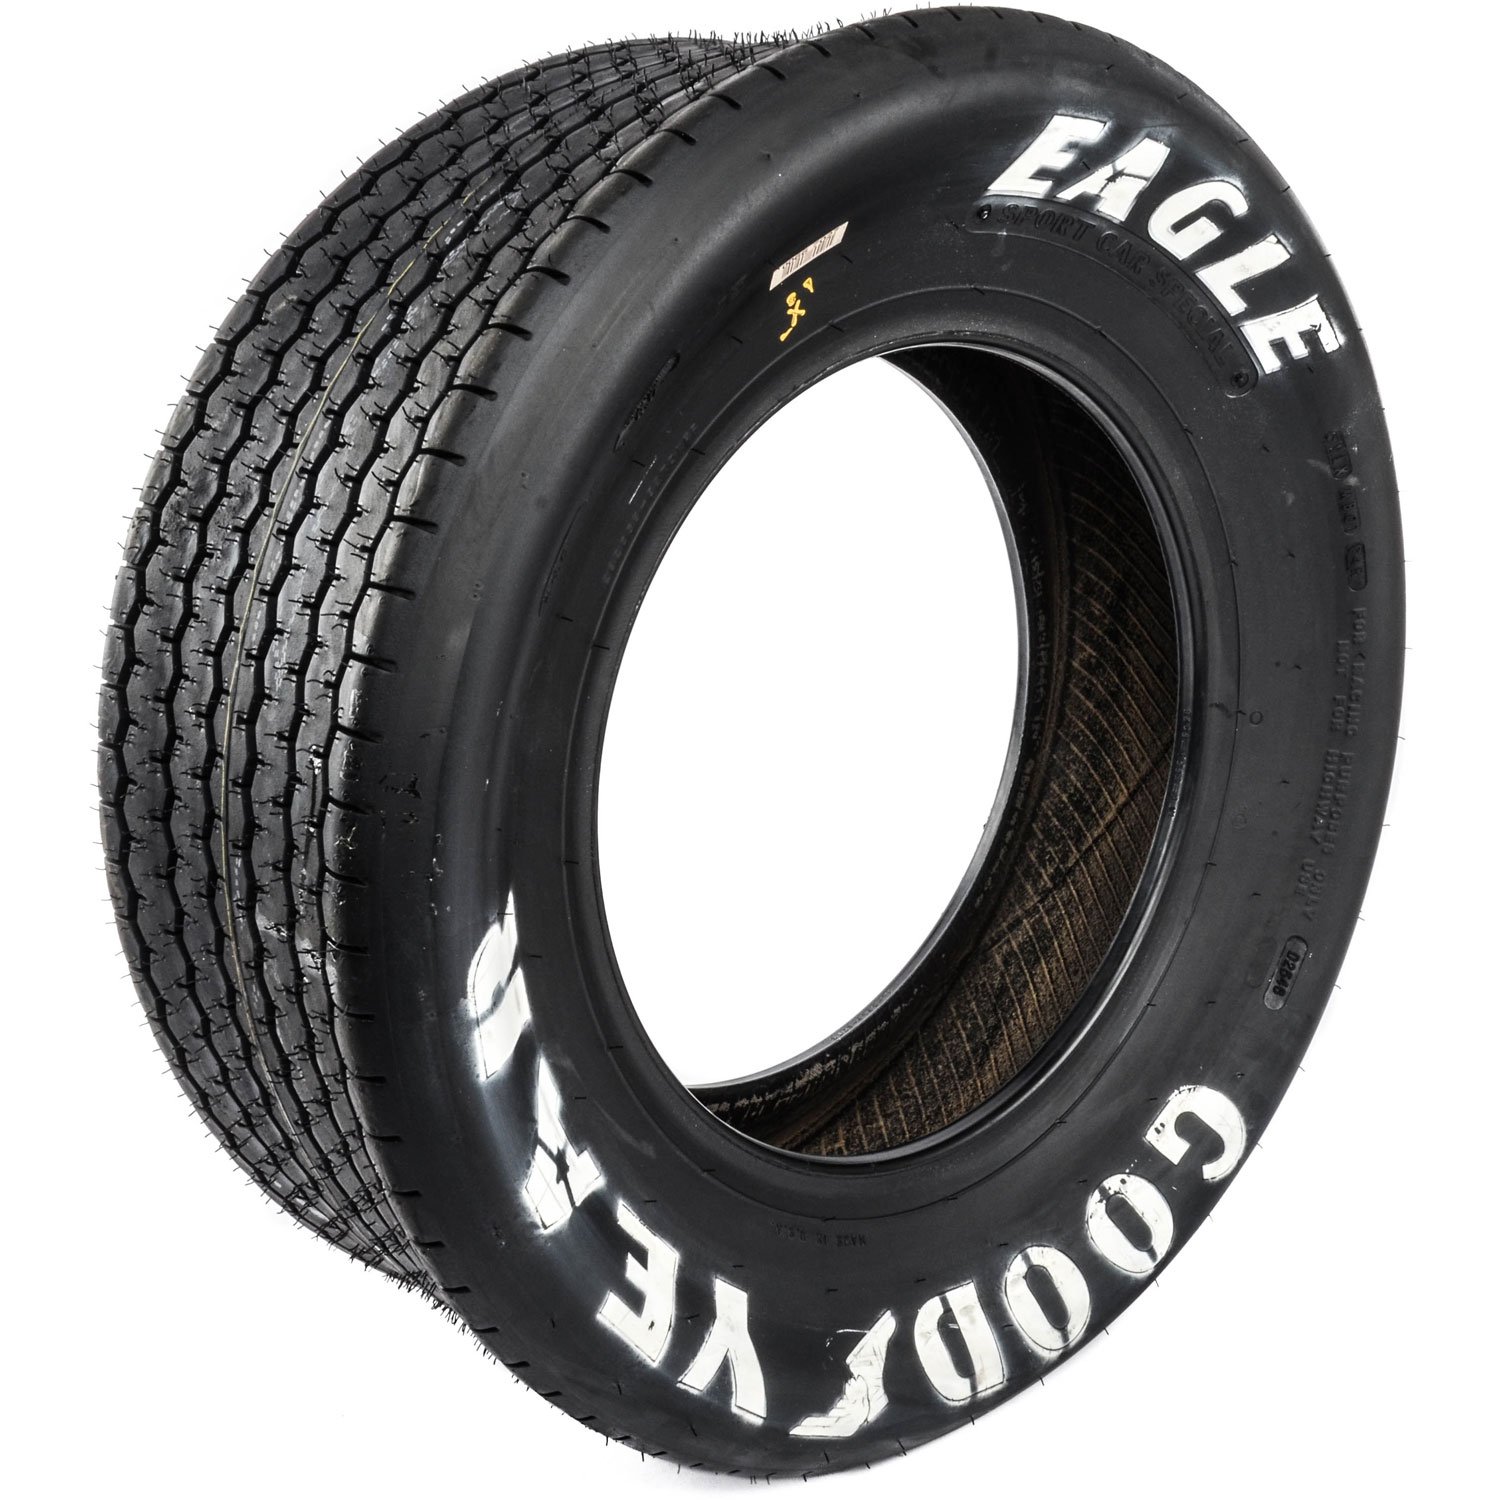 Goodyear Vintage Sportscar Special Tires - JEGS High Performance